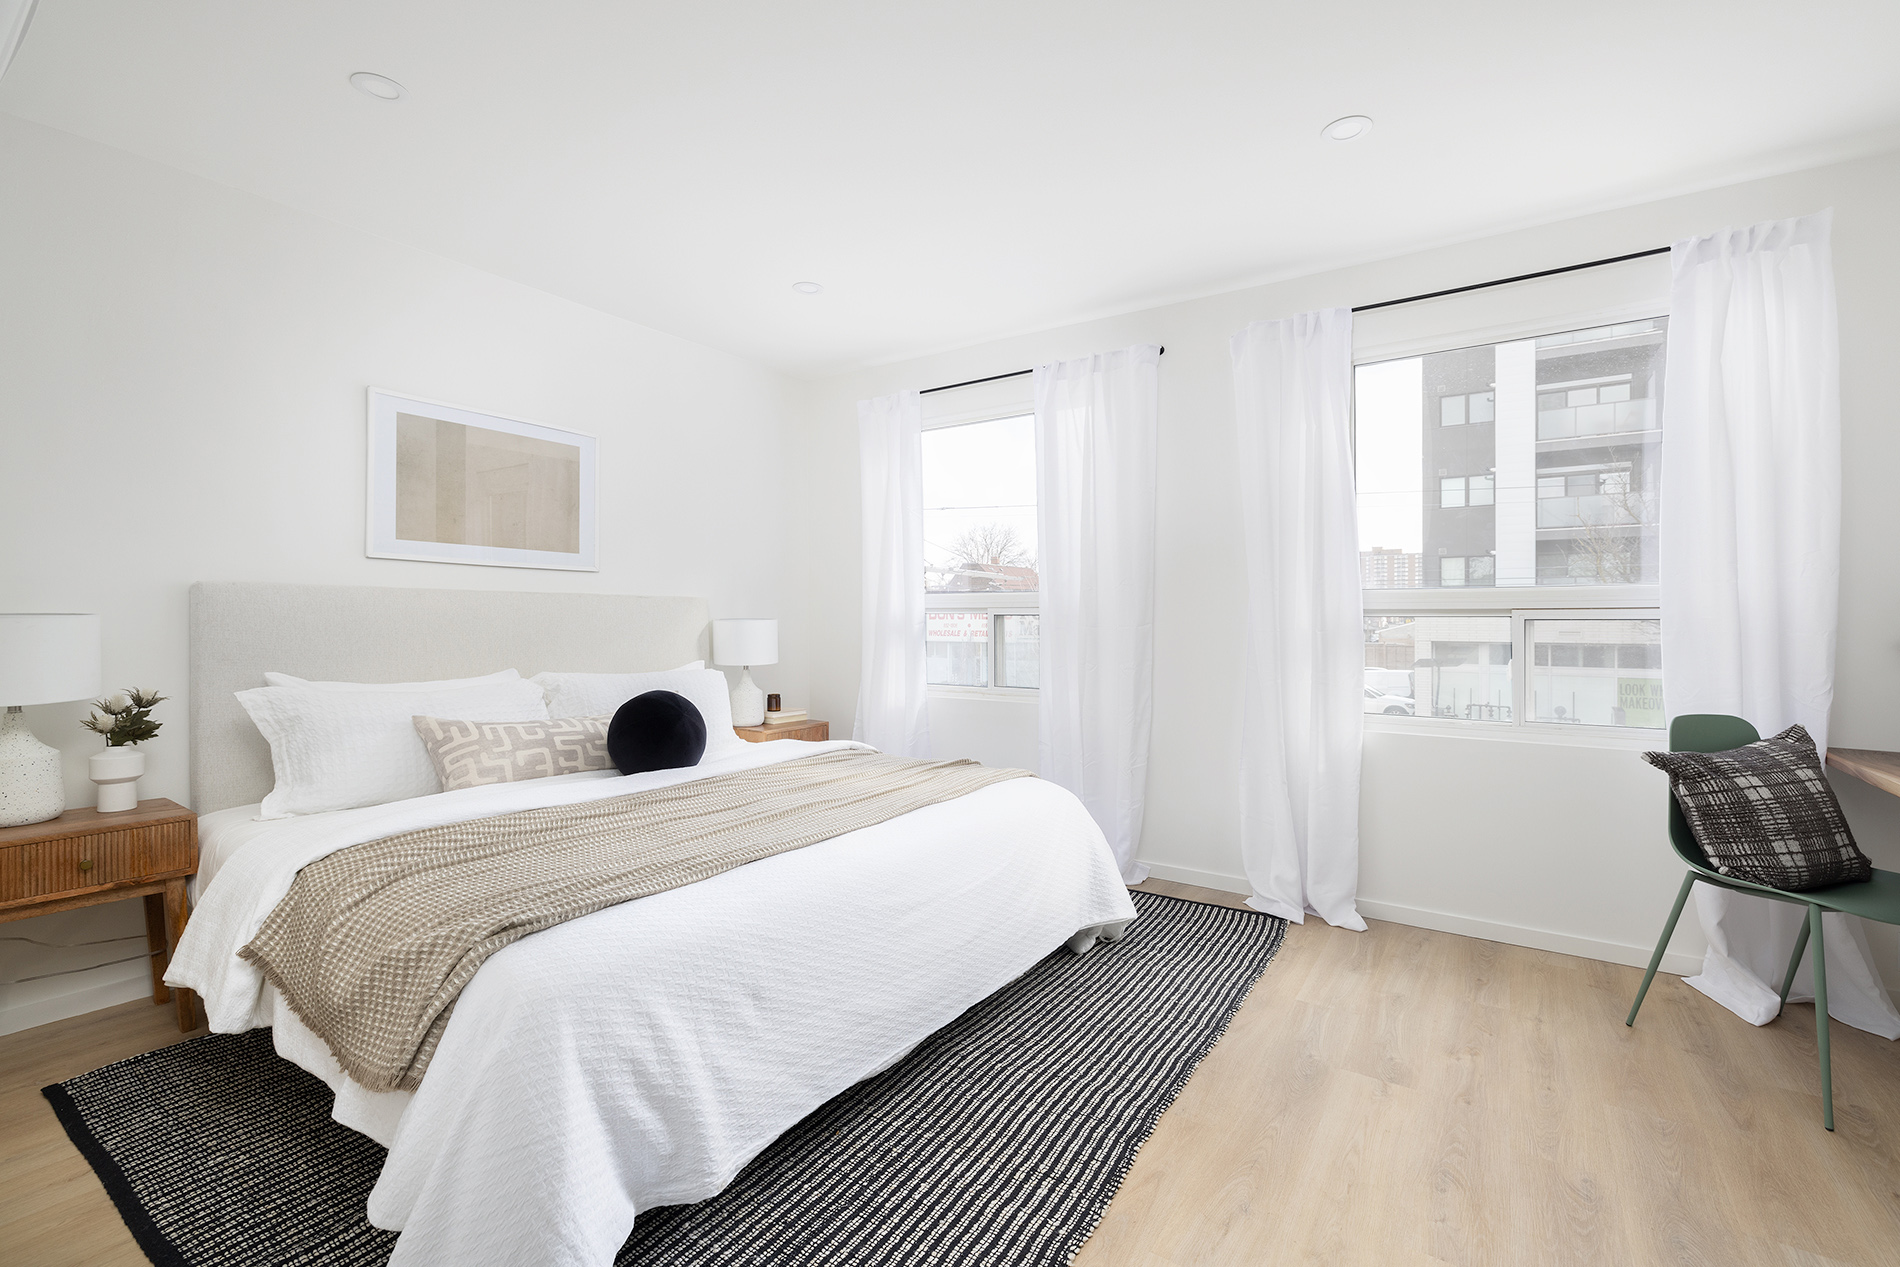 The king-sized main bedroom overlooks St. Clair. 